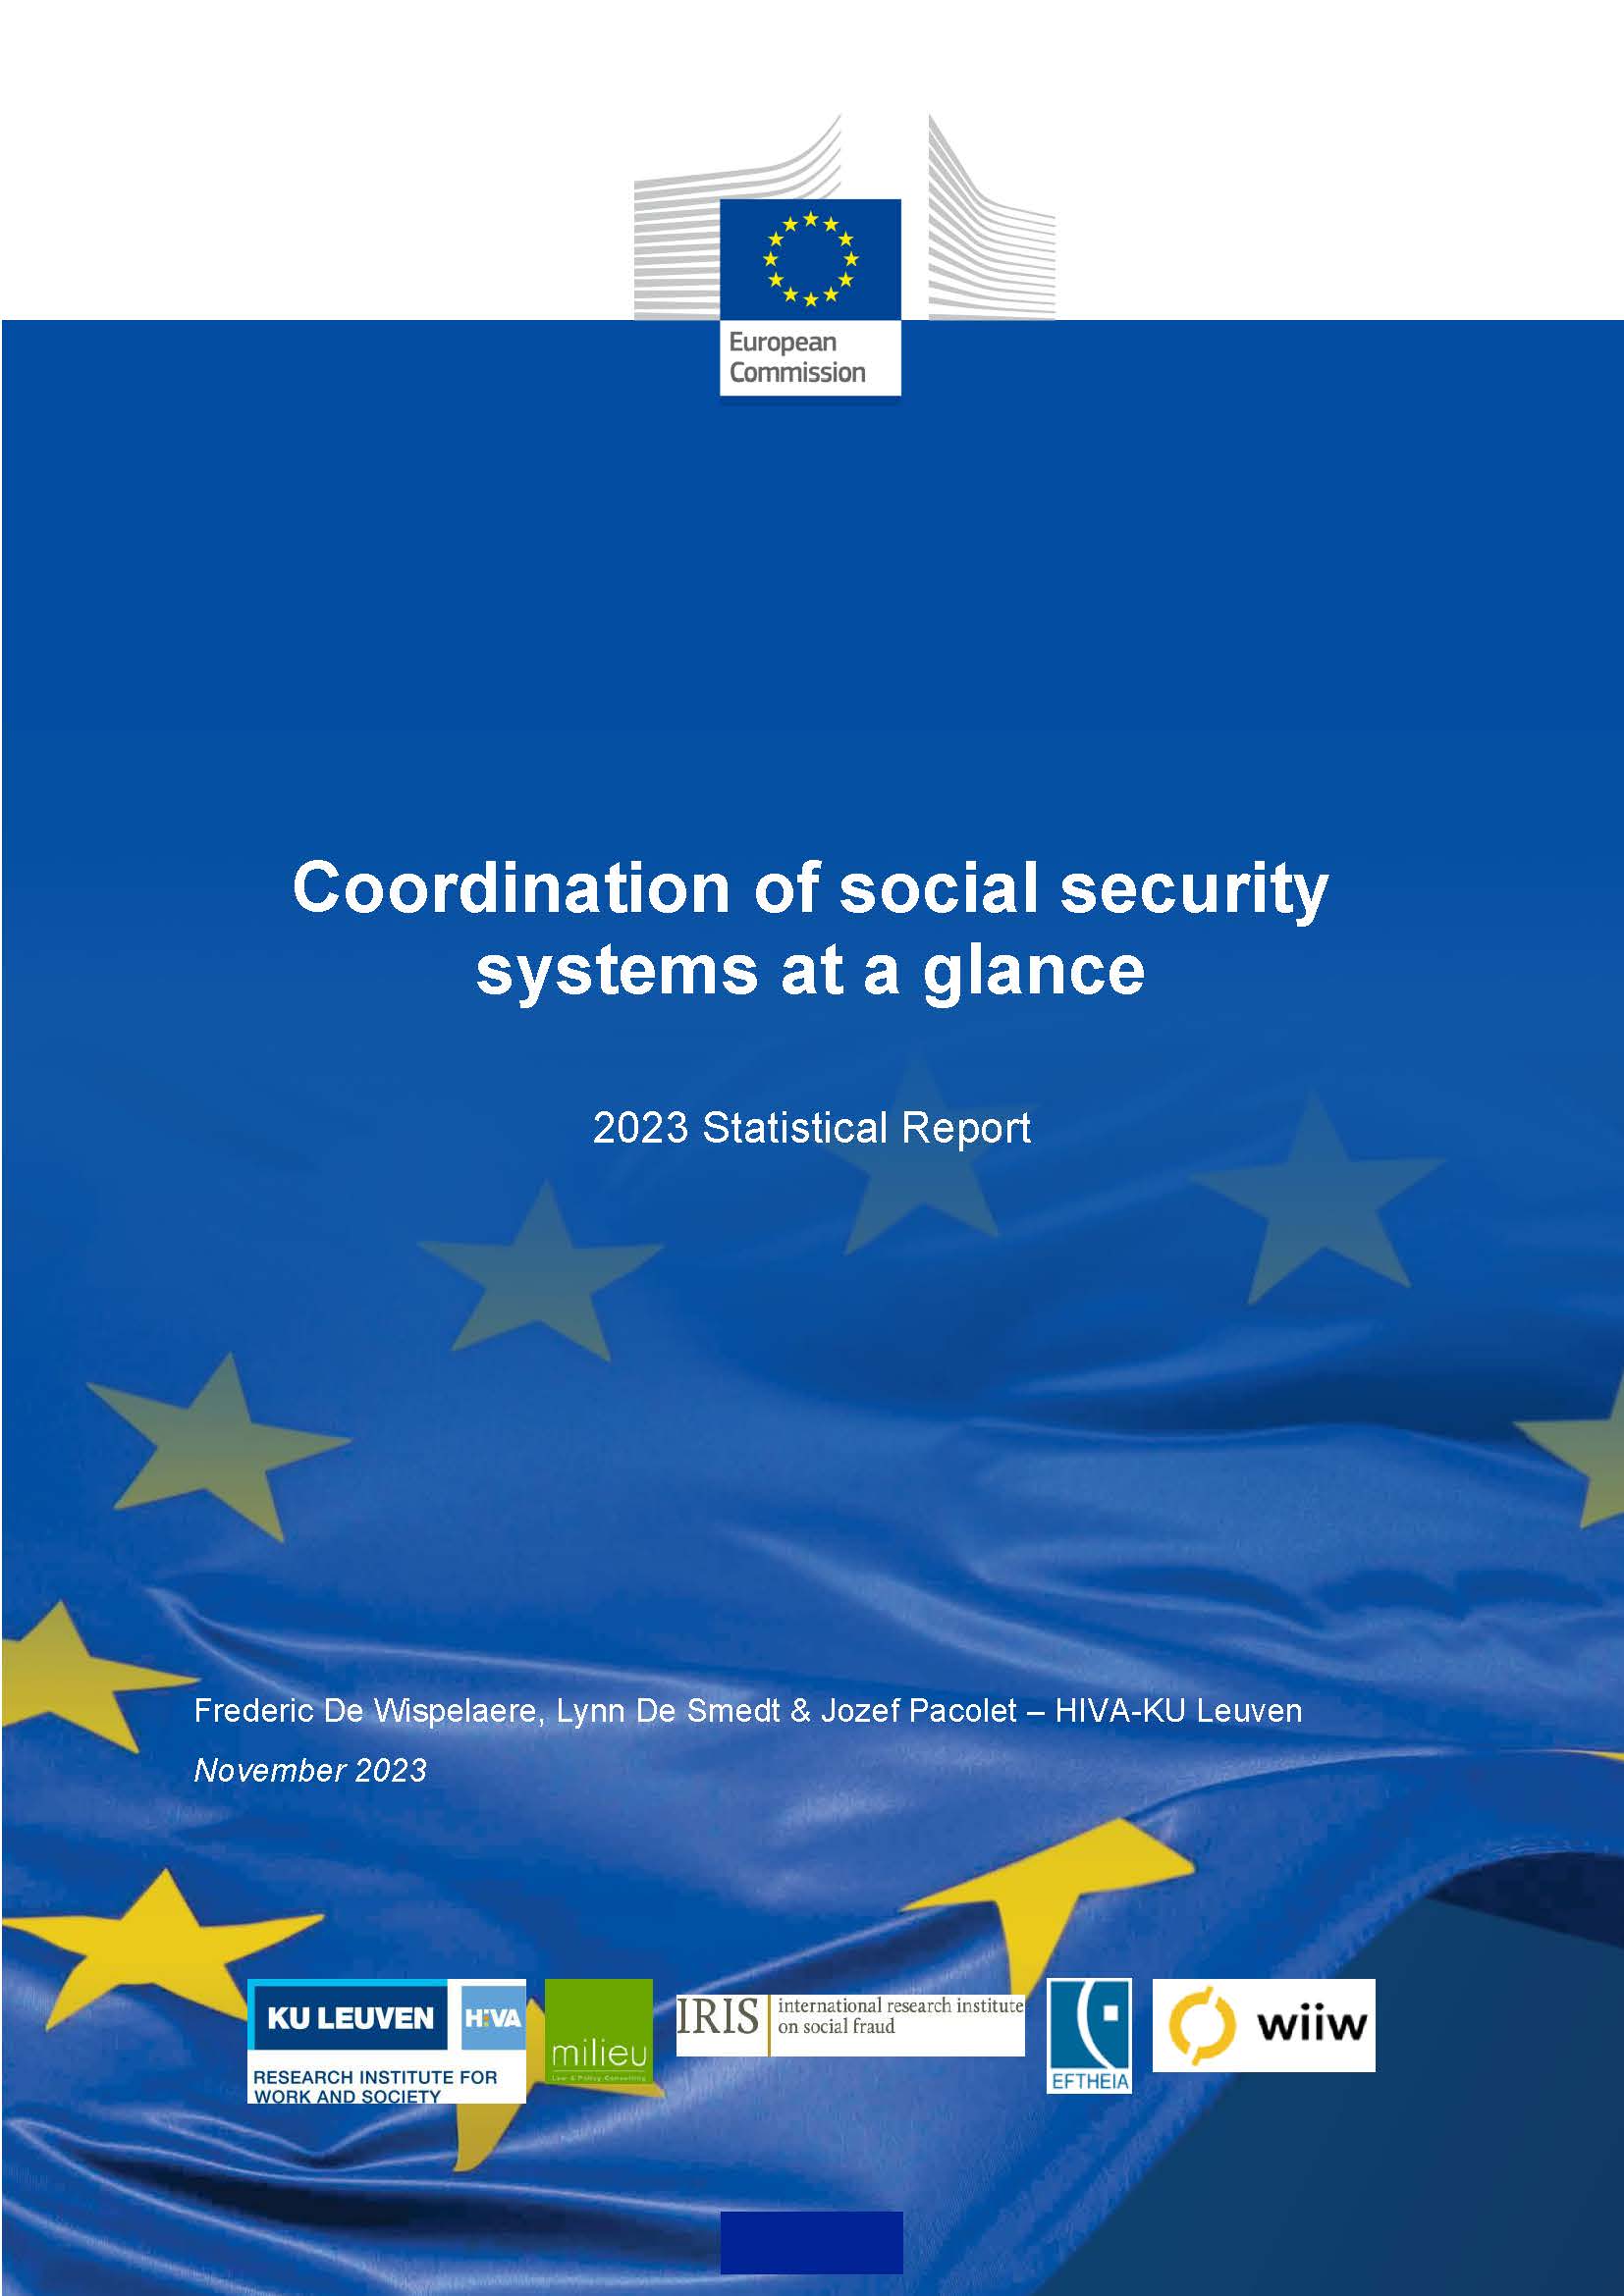 Coordination of social security systems at a glance - 
2023 Statistical Report